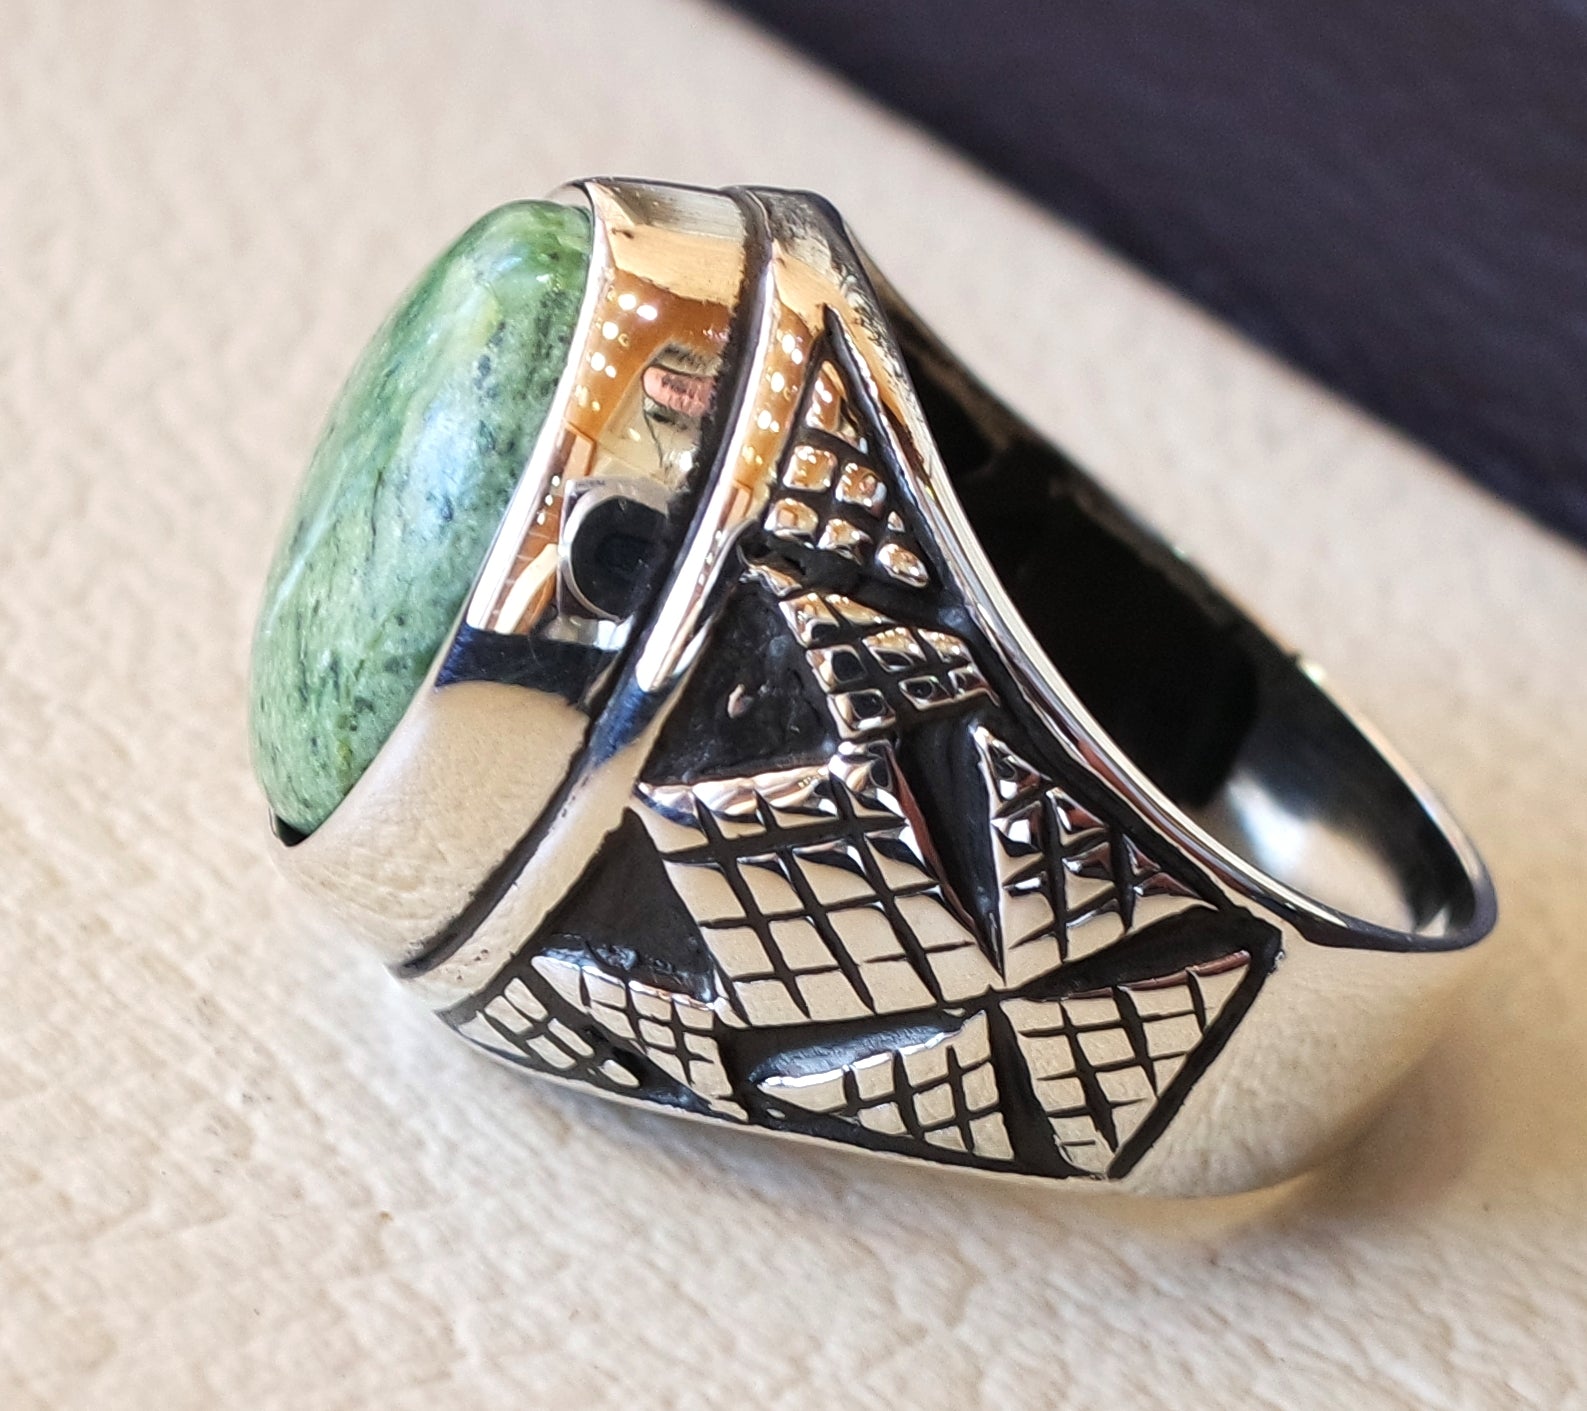 green swiss opal natural stone men ring sterling silver 925 stunning genuine gem ottoman arabic style jewelry all sizes